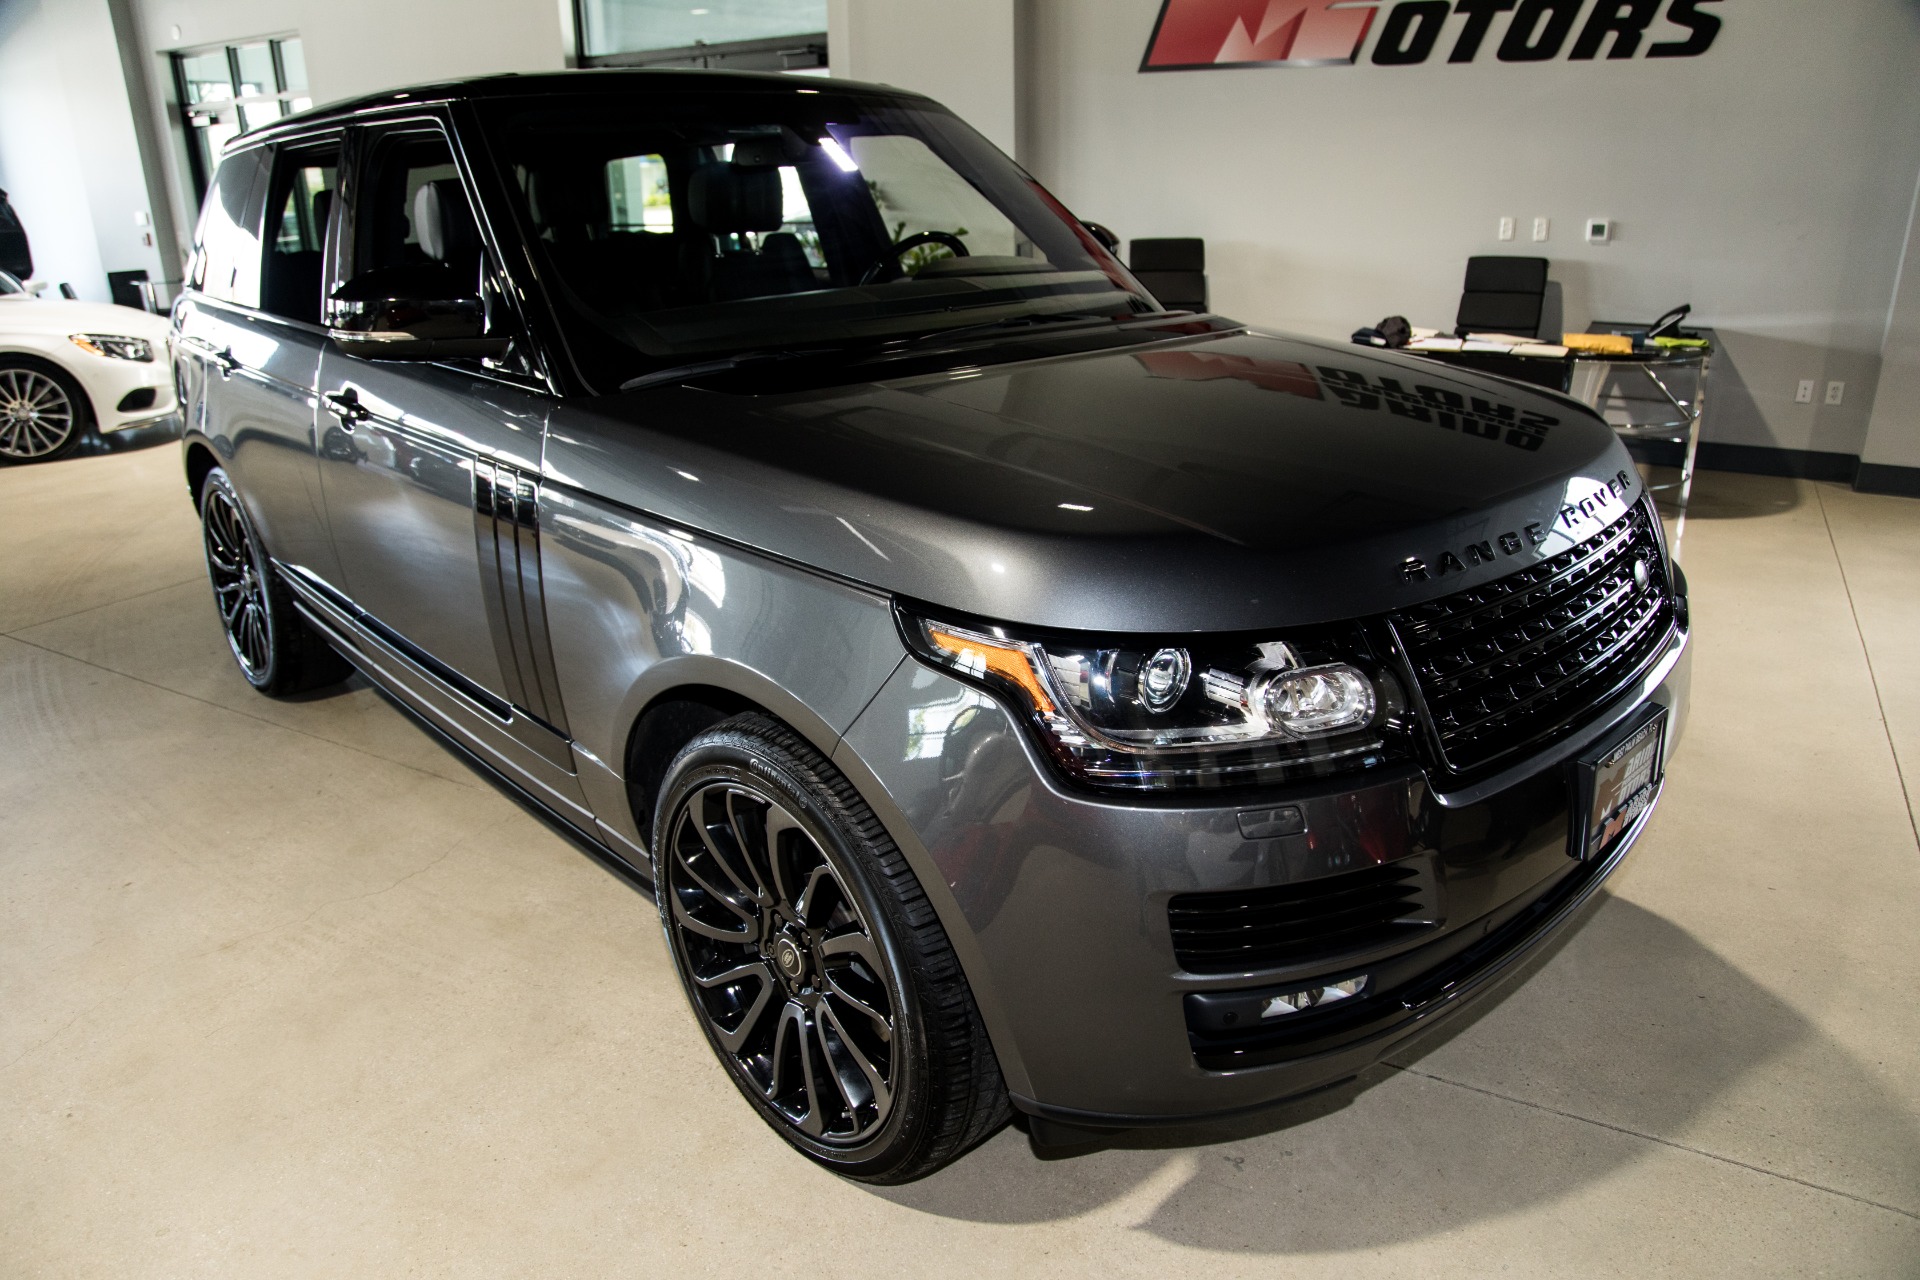 Used 2016 Land Rover Range Rover Supercharged For Sale ($69,900